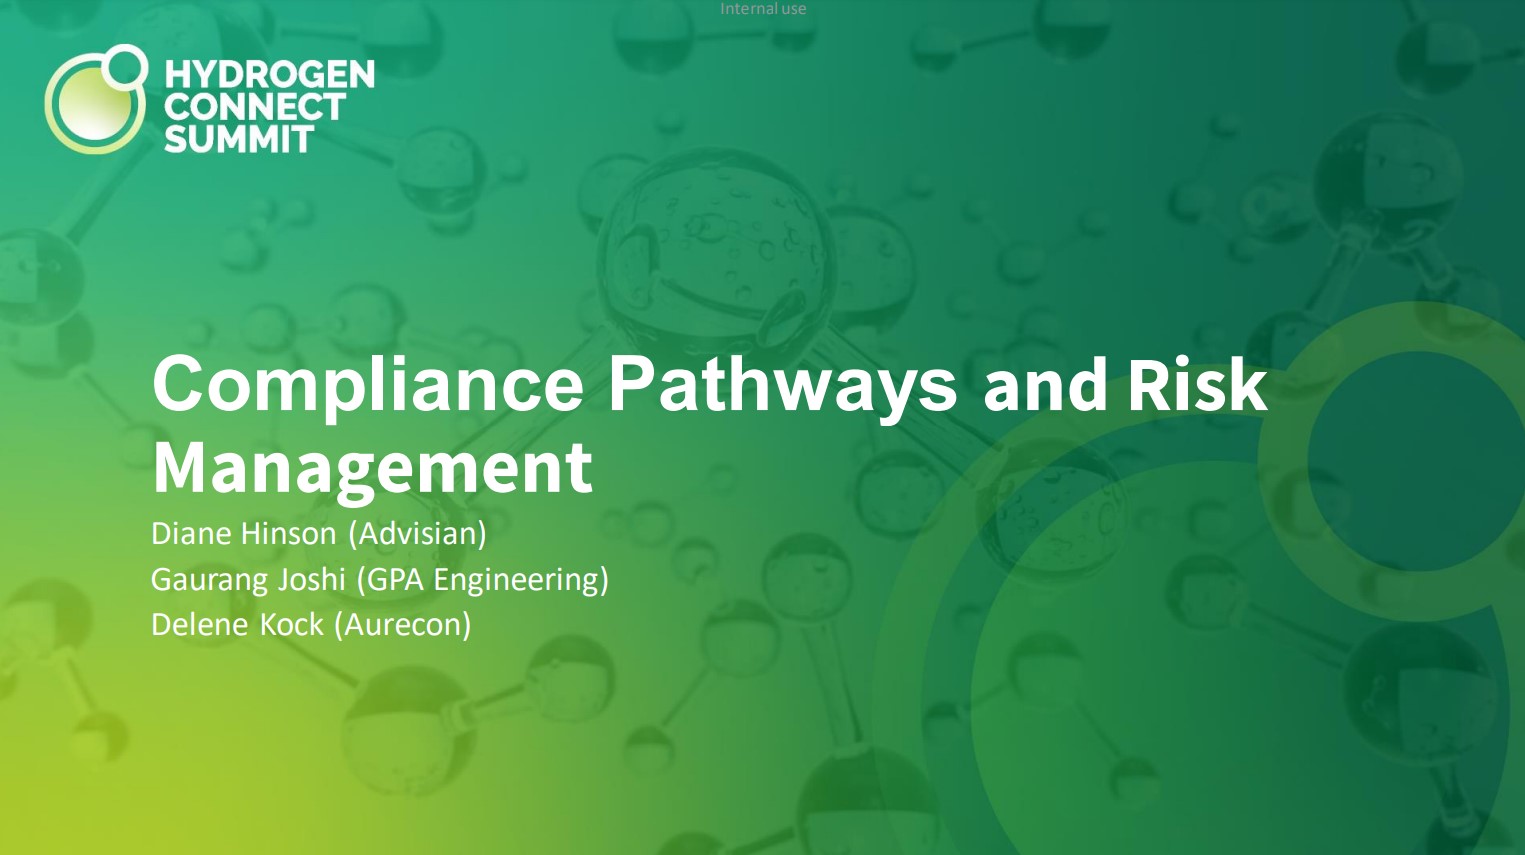 You are currently viewing Hydrogen Connect Summit 2022 – Compliance Pathways and Risk Management